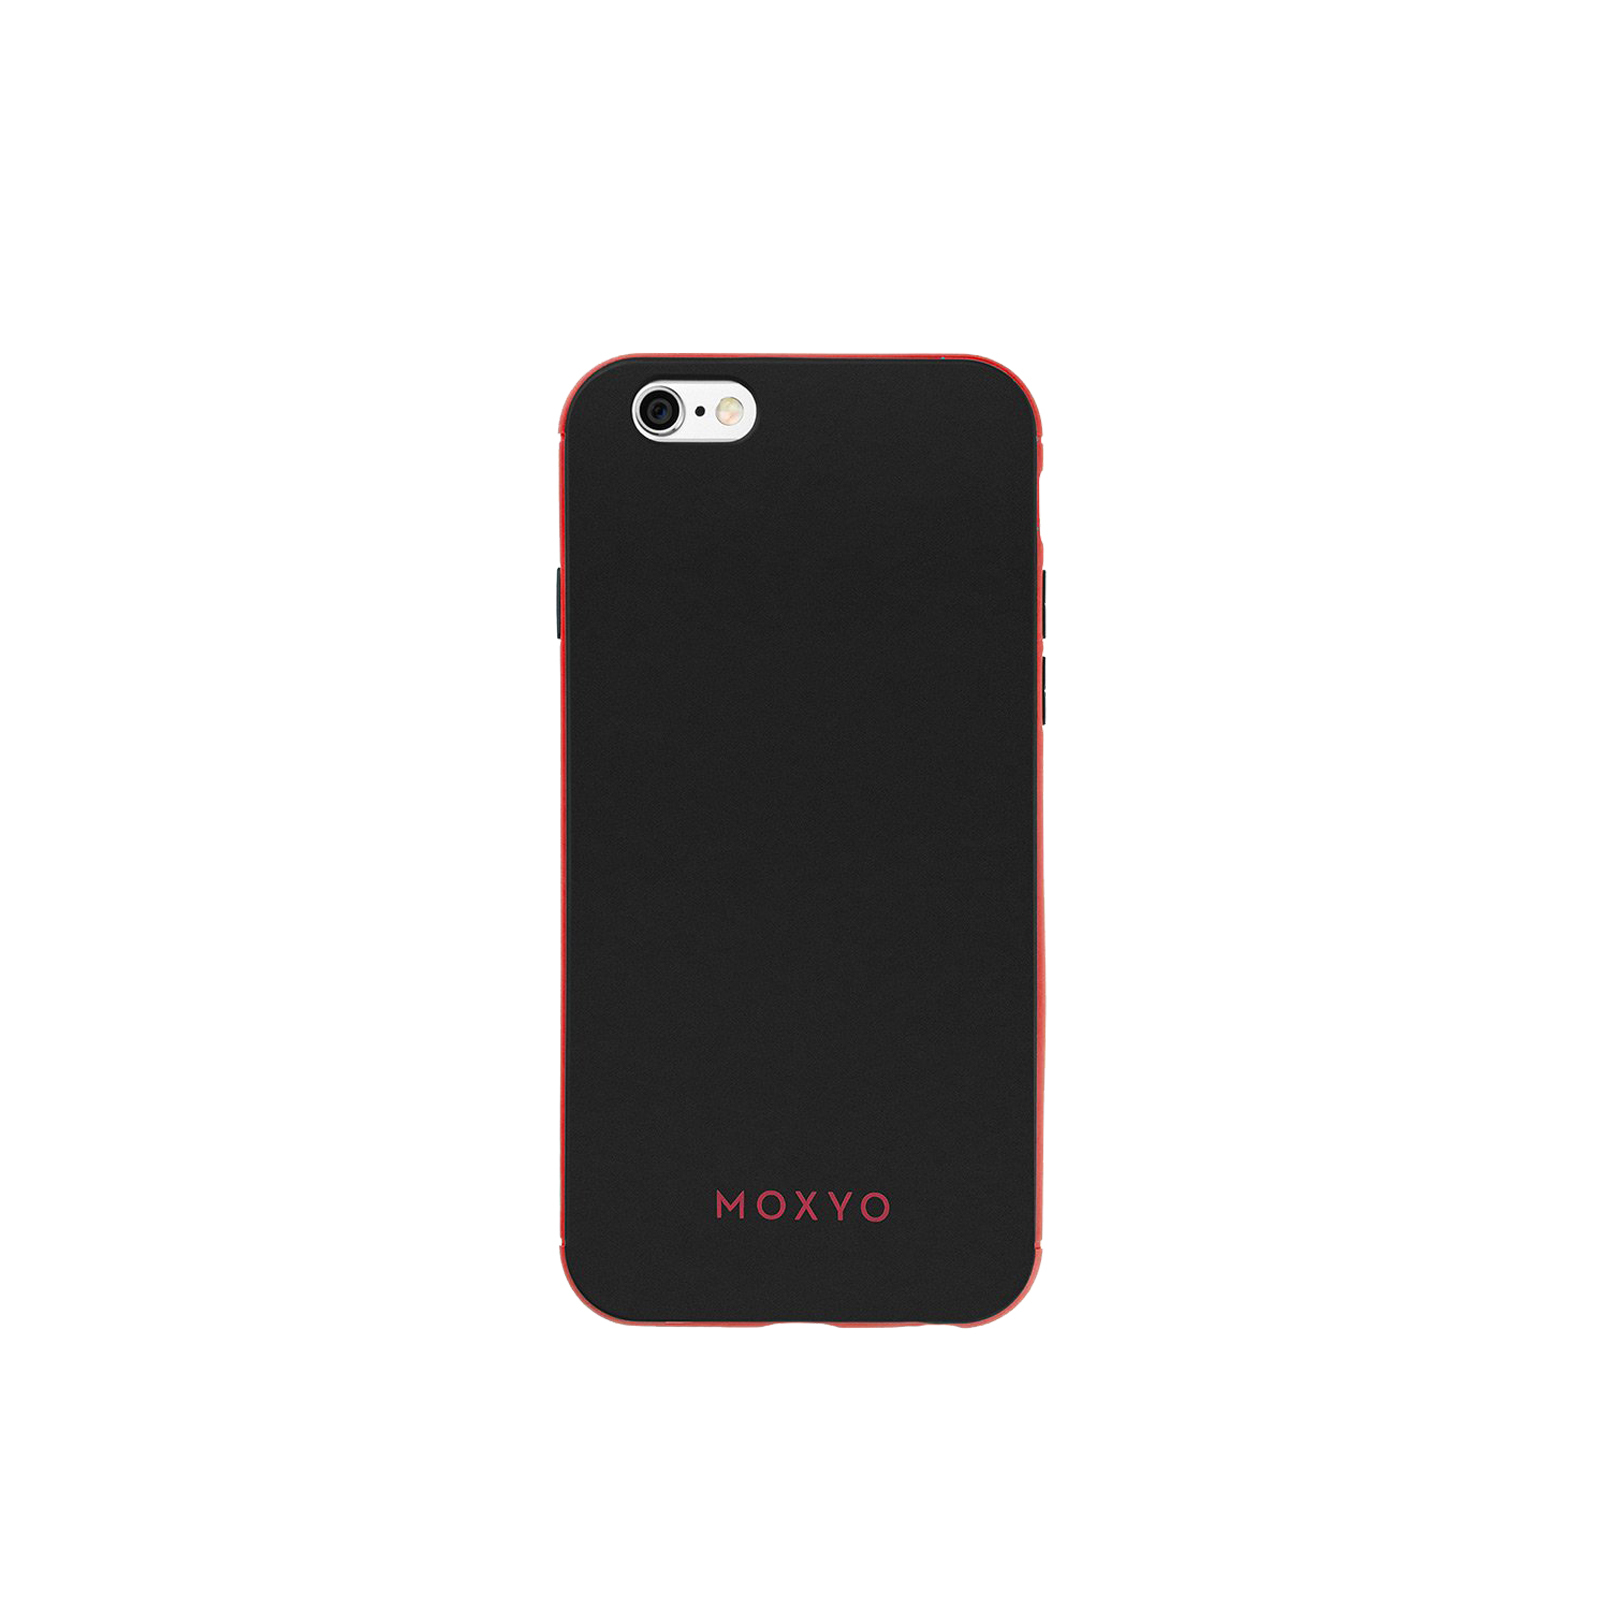 Moxyo Ginza iPhone 6 / 7 / 8 Case [Black / Red]